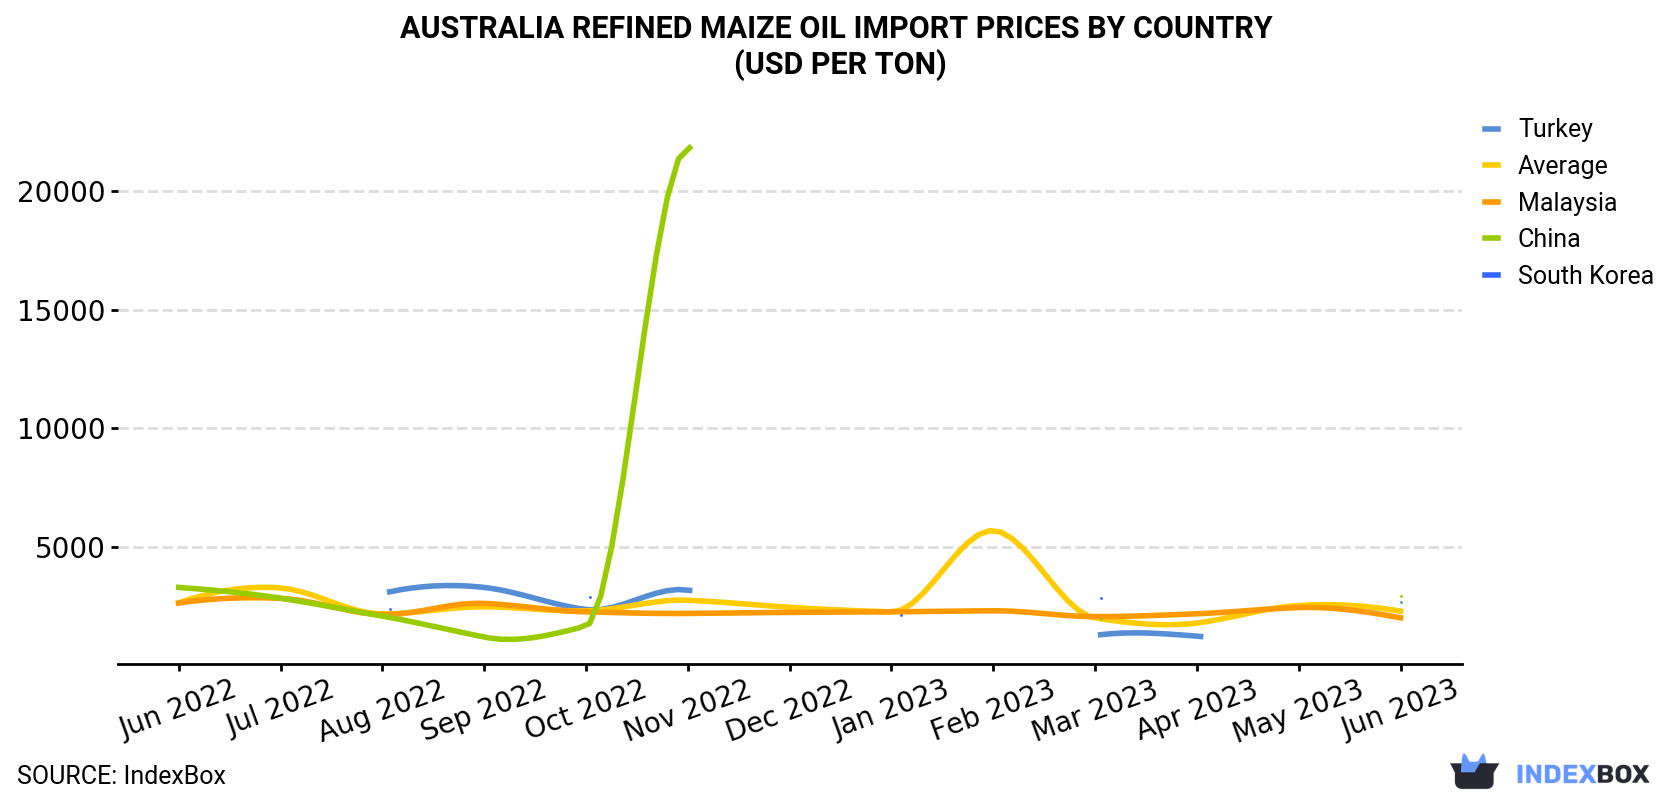 Australia Refined Maize Oil Import Prices By Country (USD Per Ton)